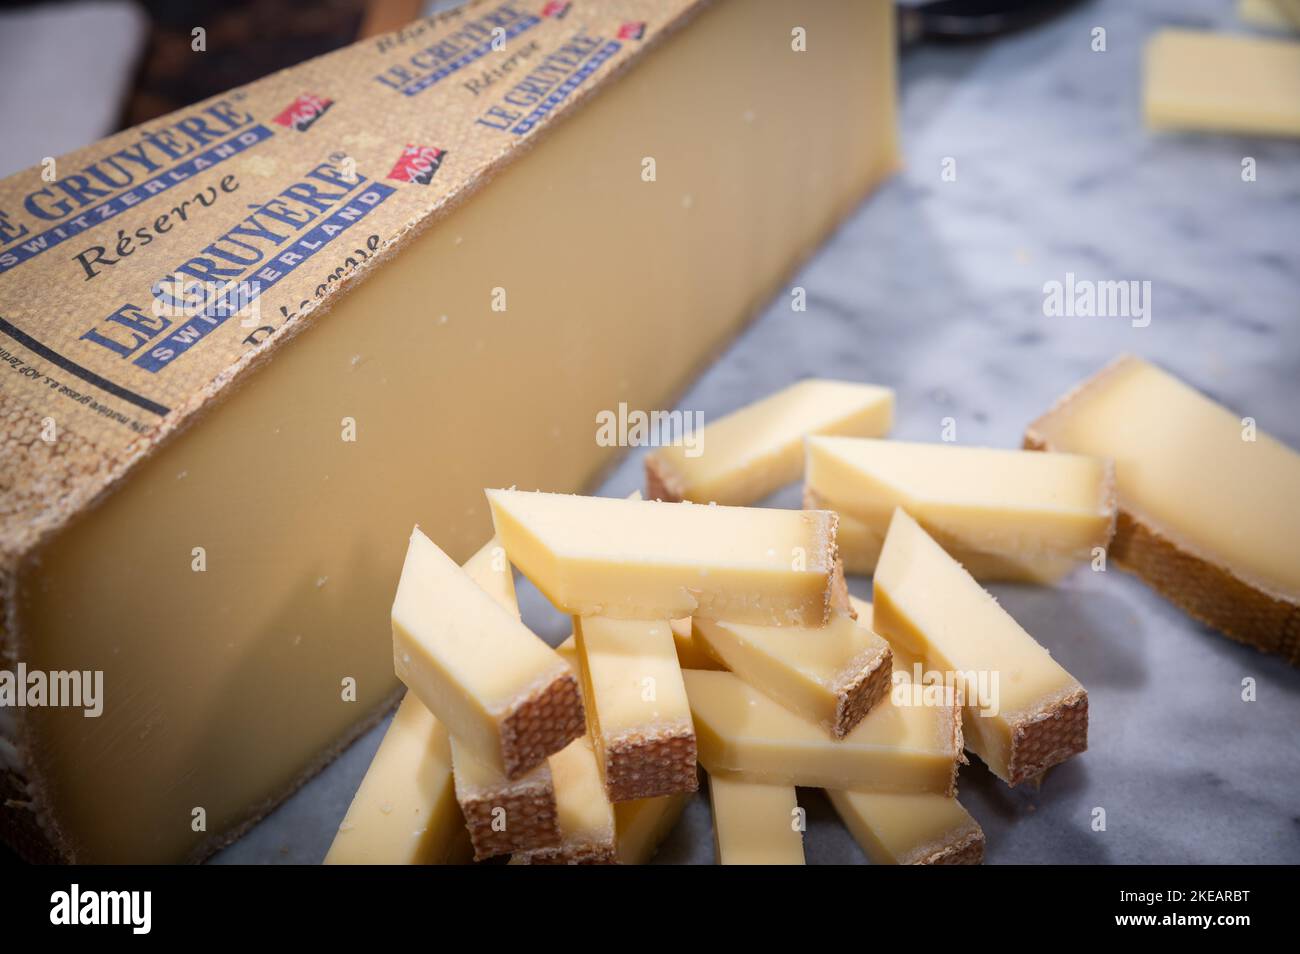 July 11 2022, Lyon, France : Switzerland cheese : Le Gruyère Réserve, famous swiss cheese in a cellar on a marbble background Stock Photo